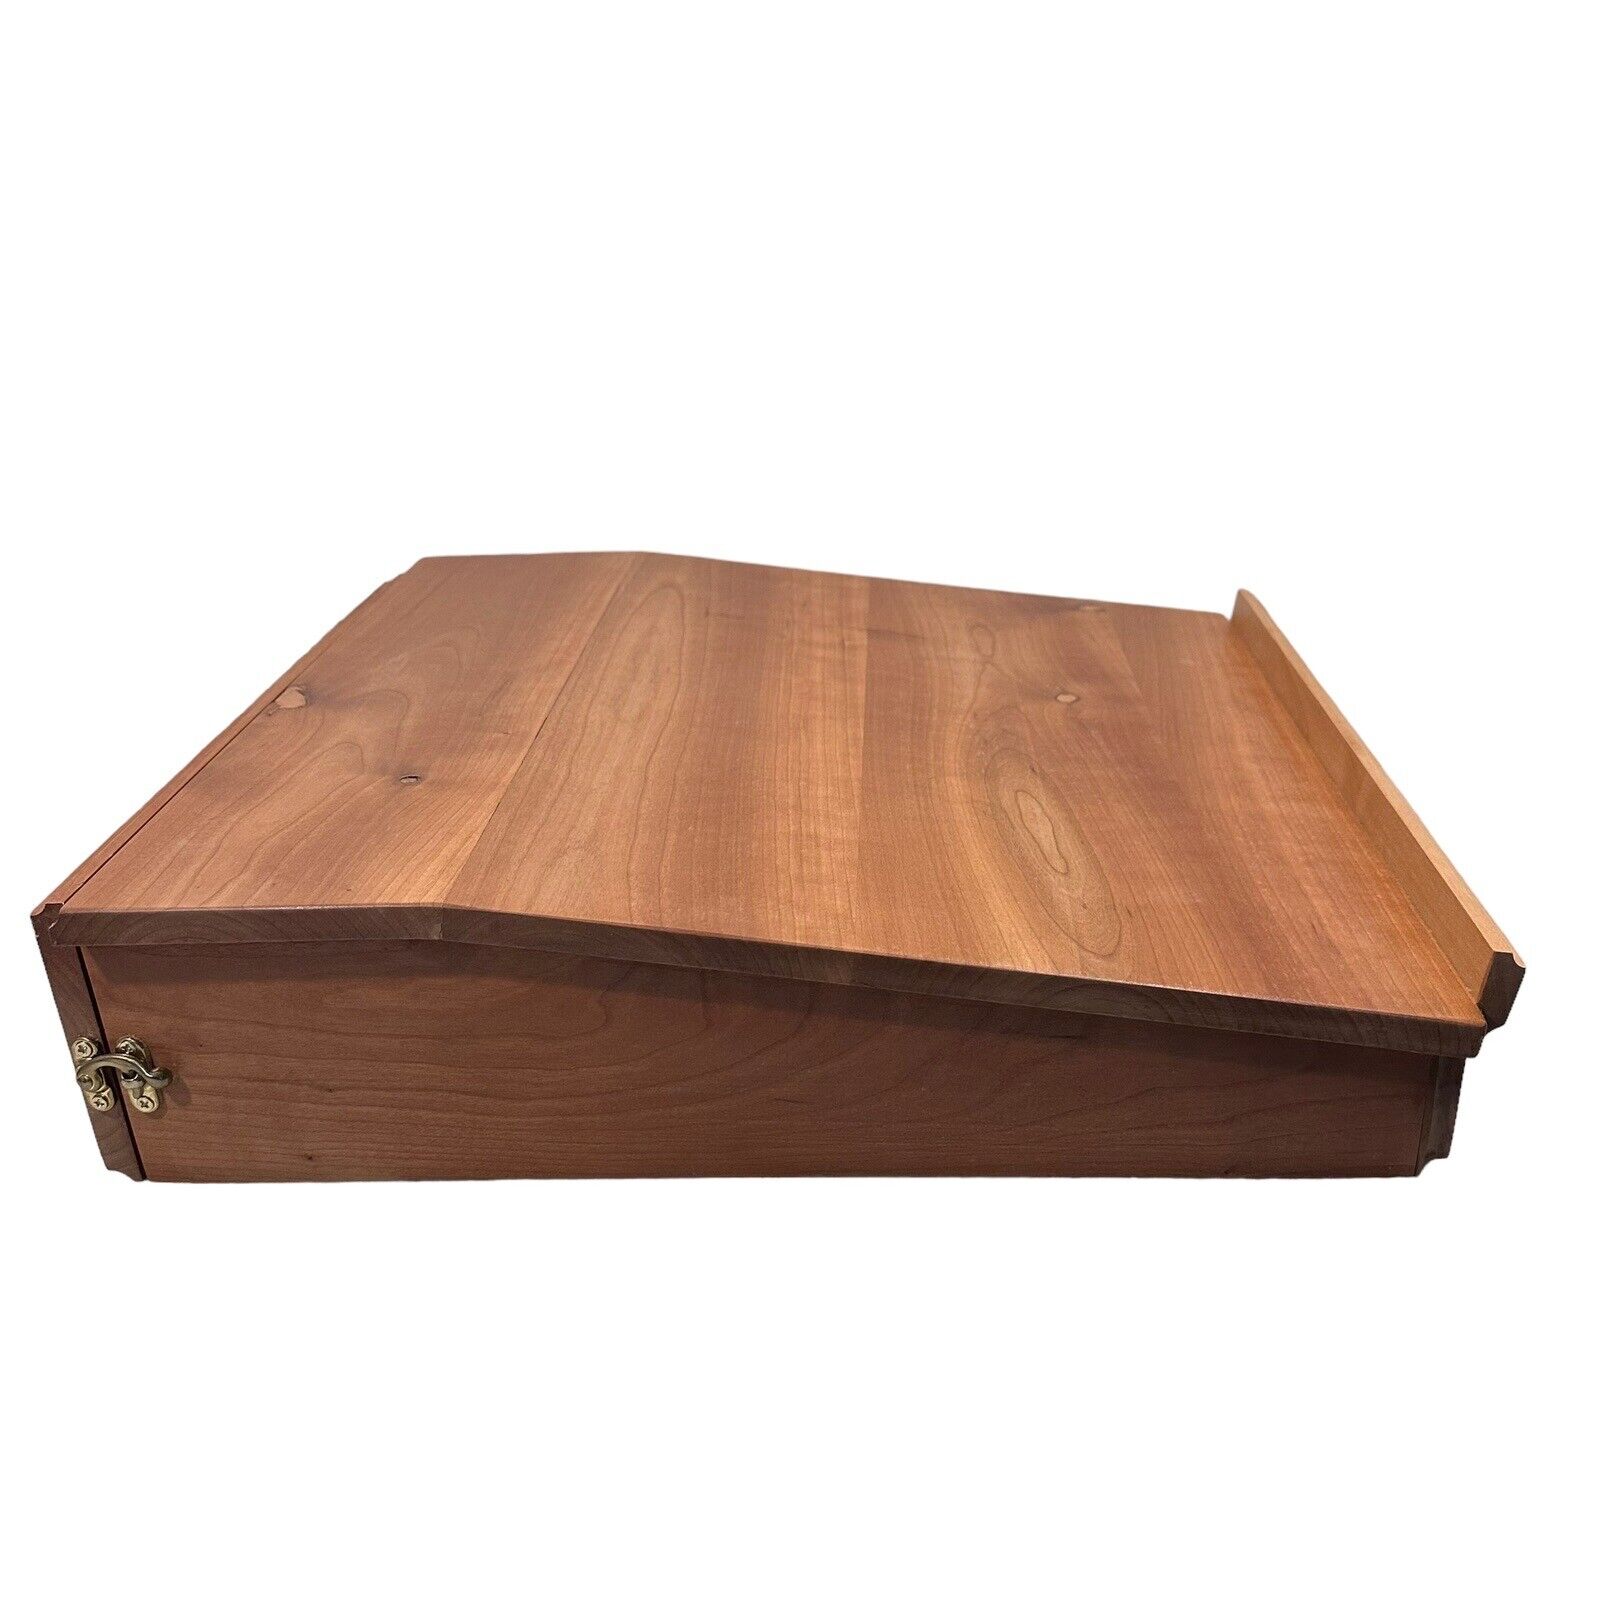 Wood Executive Lap Desk with Storage Compartments Natural Finish Leather Handle